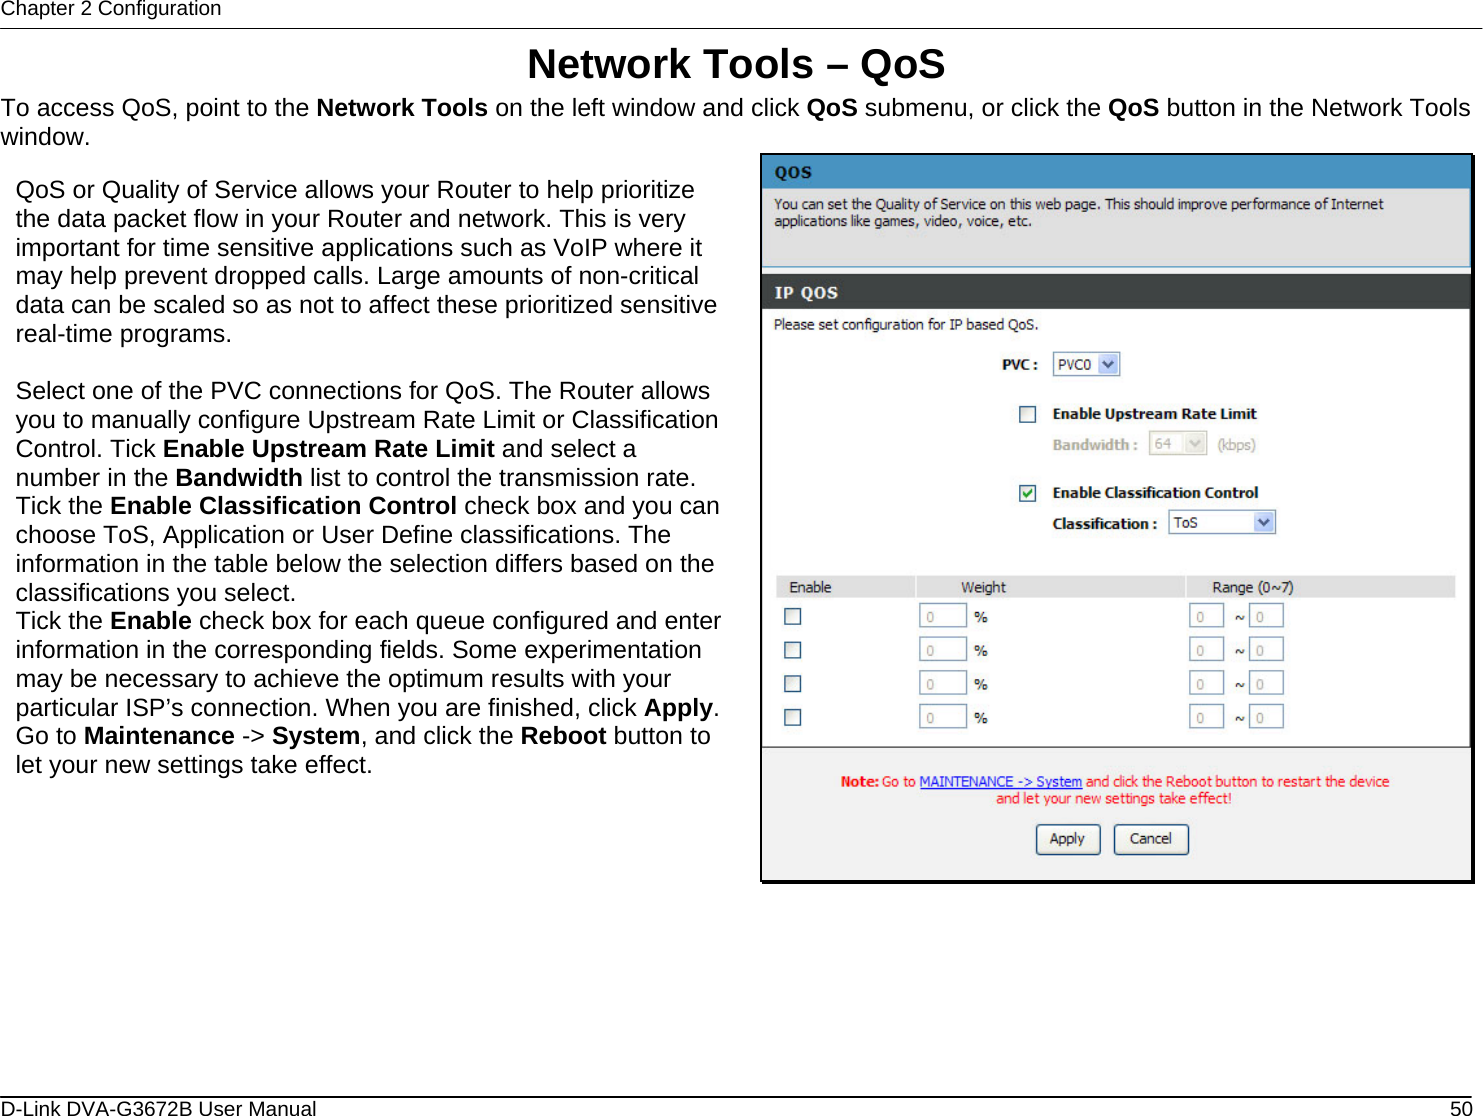 Chapter 2 Configuration Network Tools – QoS To access QoS, point to the Network Tools on the left window and click QoS submenu, or click the QoS button in the Network Tools window.  QoS or Quality of Service allows your Router to help prioritize the data packet flow in your Router and network. This is very important for time sensitive applications such as VoIP where it may help prevent dropped calls. Large amounts of non-critical data can be scaled so as not to affect these prioritized sensitive real-time programs.  Select one of the PVC connections for QoS. The Router allows you to manually configure Upstream Rate Limit or Classification Control. Tick Enable Upstream Rate Limit and select a number in the Bandwidth list to control the transmission rate. Tick the Enable Classification Control check box and you can choose ToS, Application or User Define classifications. The information in the table below the selection differs based on the classifications you select. Tick the Enable check box for each queue configured and enter information in the corresponding fields. Some experimentation may be necessary to achieve the optimum results with your particular ISP’s connection. When you are finished, click Apply. Go to Maintenance -&gt; System, and click the Reboot button to let your new settings take effect.        D-Link DVA-G3672B User Manual  50